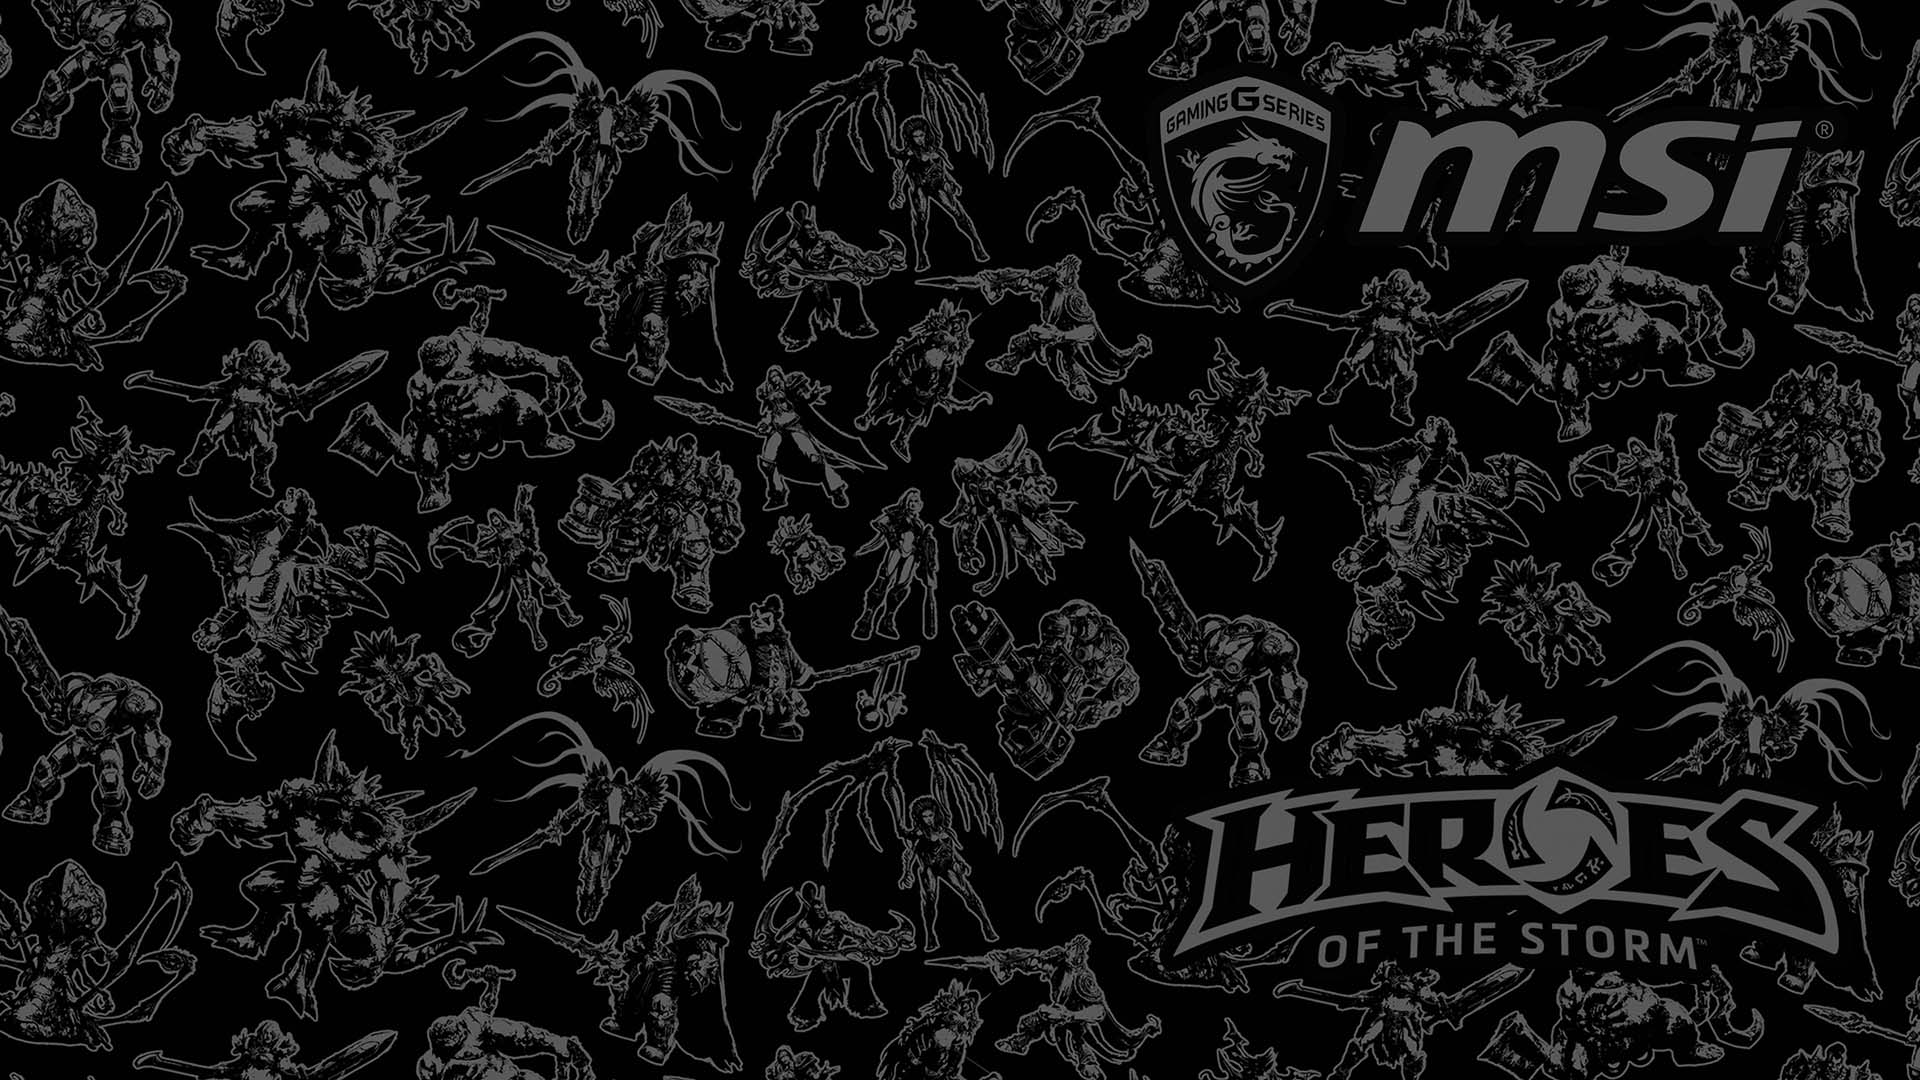 Msi Gaming_27_24 Heroes_of_the_storm Wallpaper 1920x1080 3